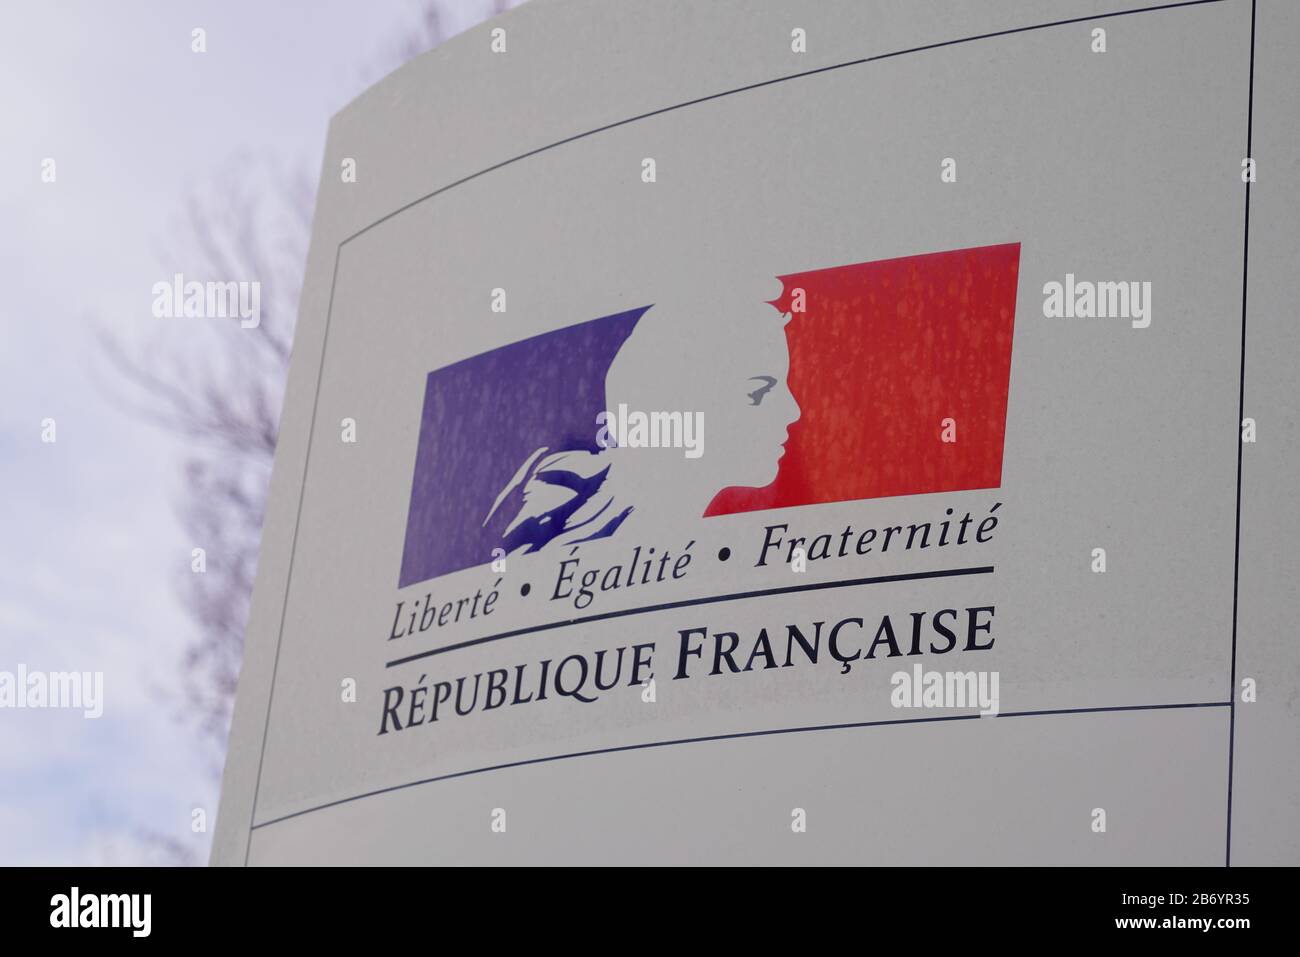 Bordeaux , Aquitaine / France - 11 19 2019 : Republique Francaise signage logo France Republic freedom equality fraternity french sign panel board ins Stock Photo